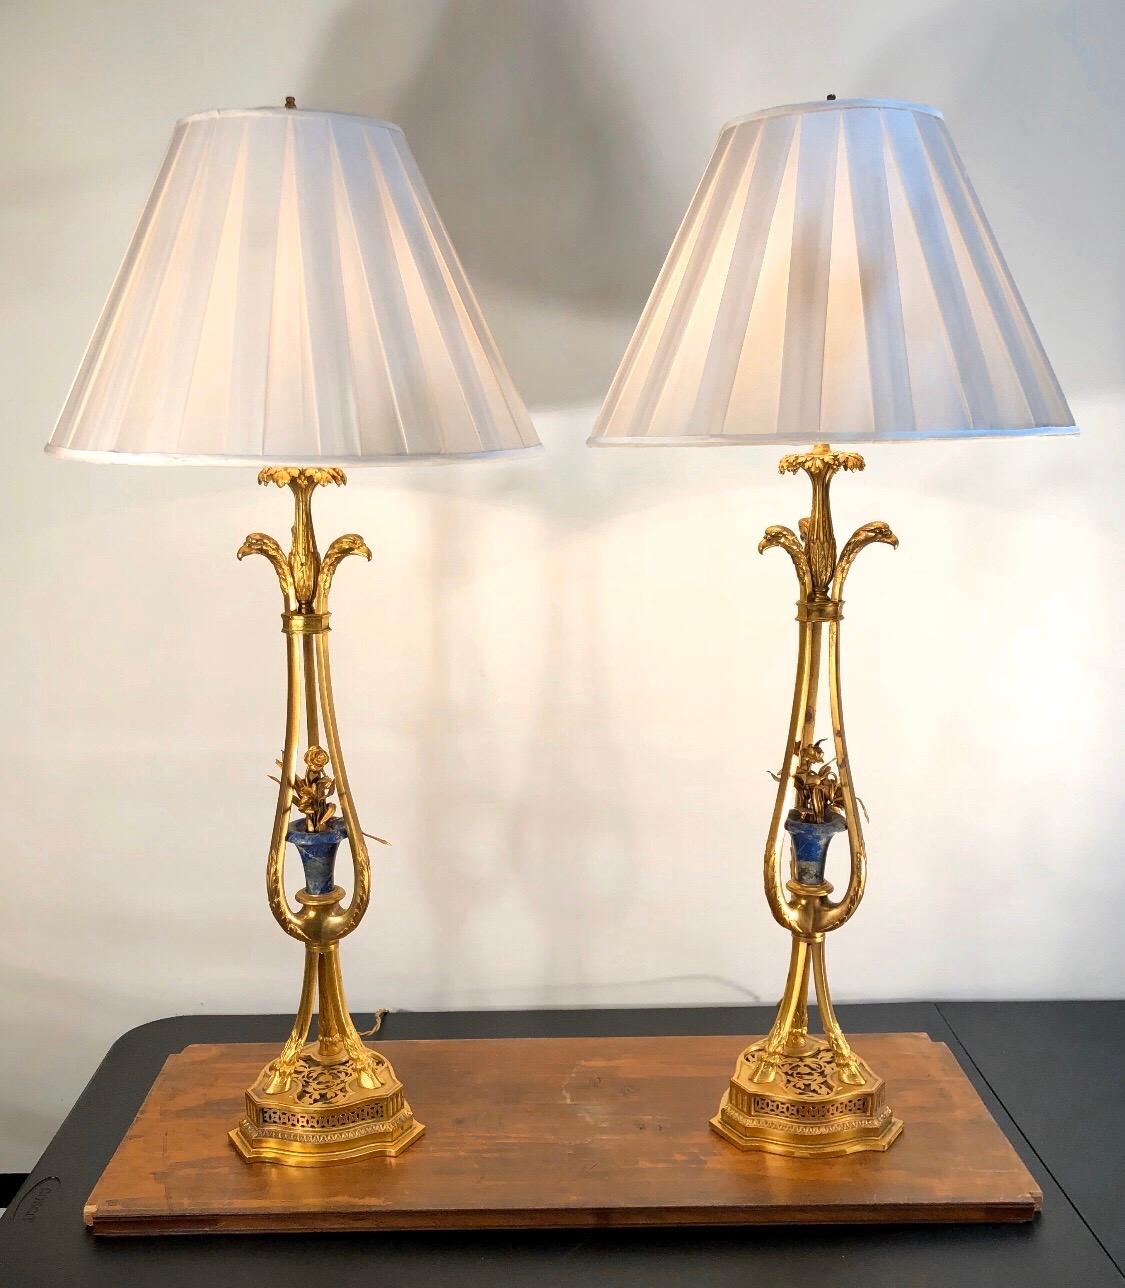 Magnificent pair of 1790-1800 French neoclassical bronze doré tripod-candlesticks made into lamps. Each tripod-leg has an eagle head at the top and a hoof foot at the bottom. The tripod-legs come up from a chased and pierced base. The legs come